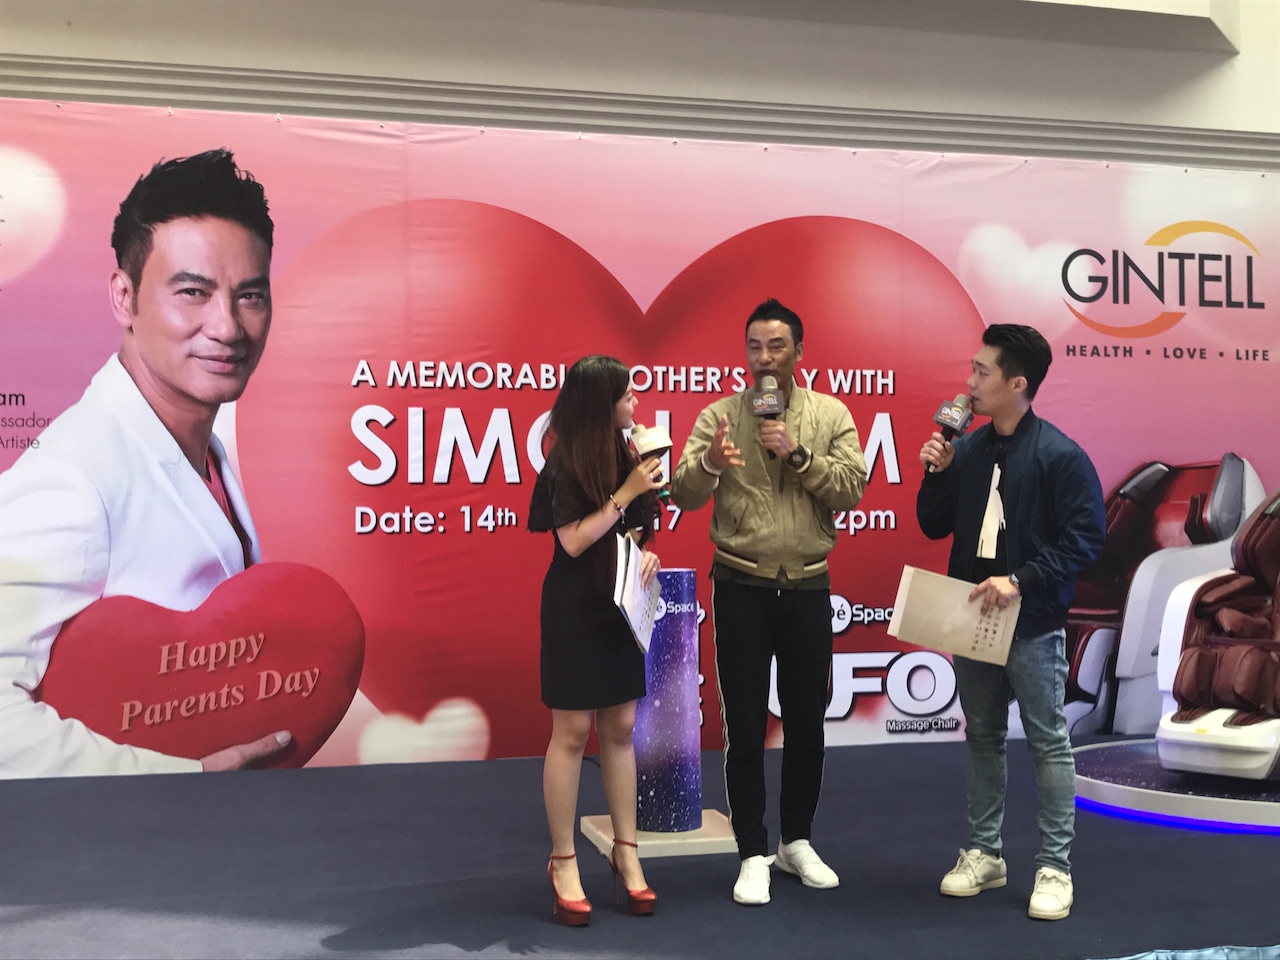 Hk Renowned Actor Cum Gintell S Ambassador Simon Yam Celebrated A Blissful Mother S Day With His